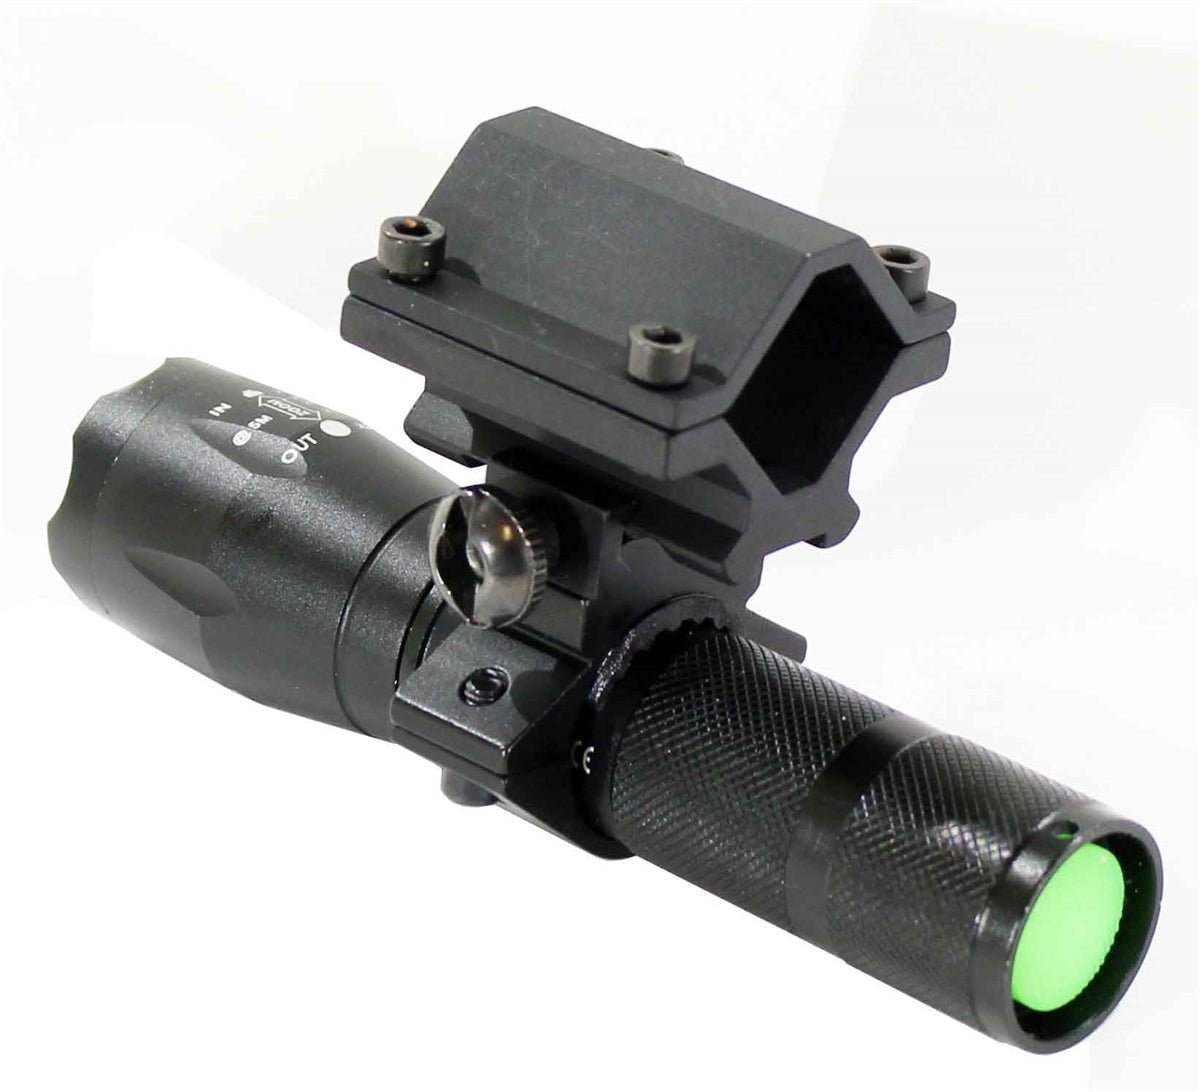 Tactical 1200 Lumen Flashlight With Mount Compatible With Mossberg Maverick 88 12 Gauge Pumps. - TRINITY SUPPLY INC